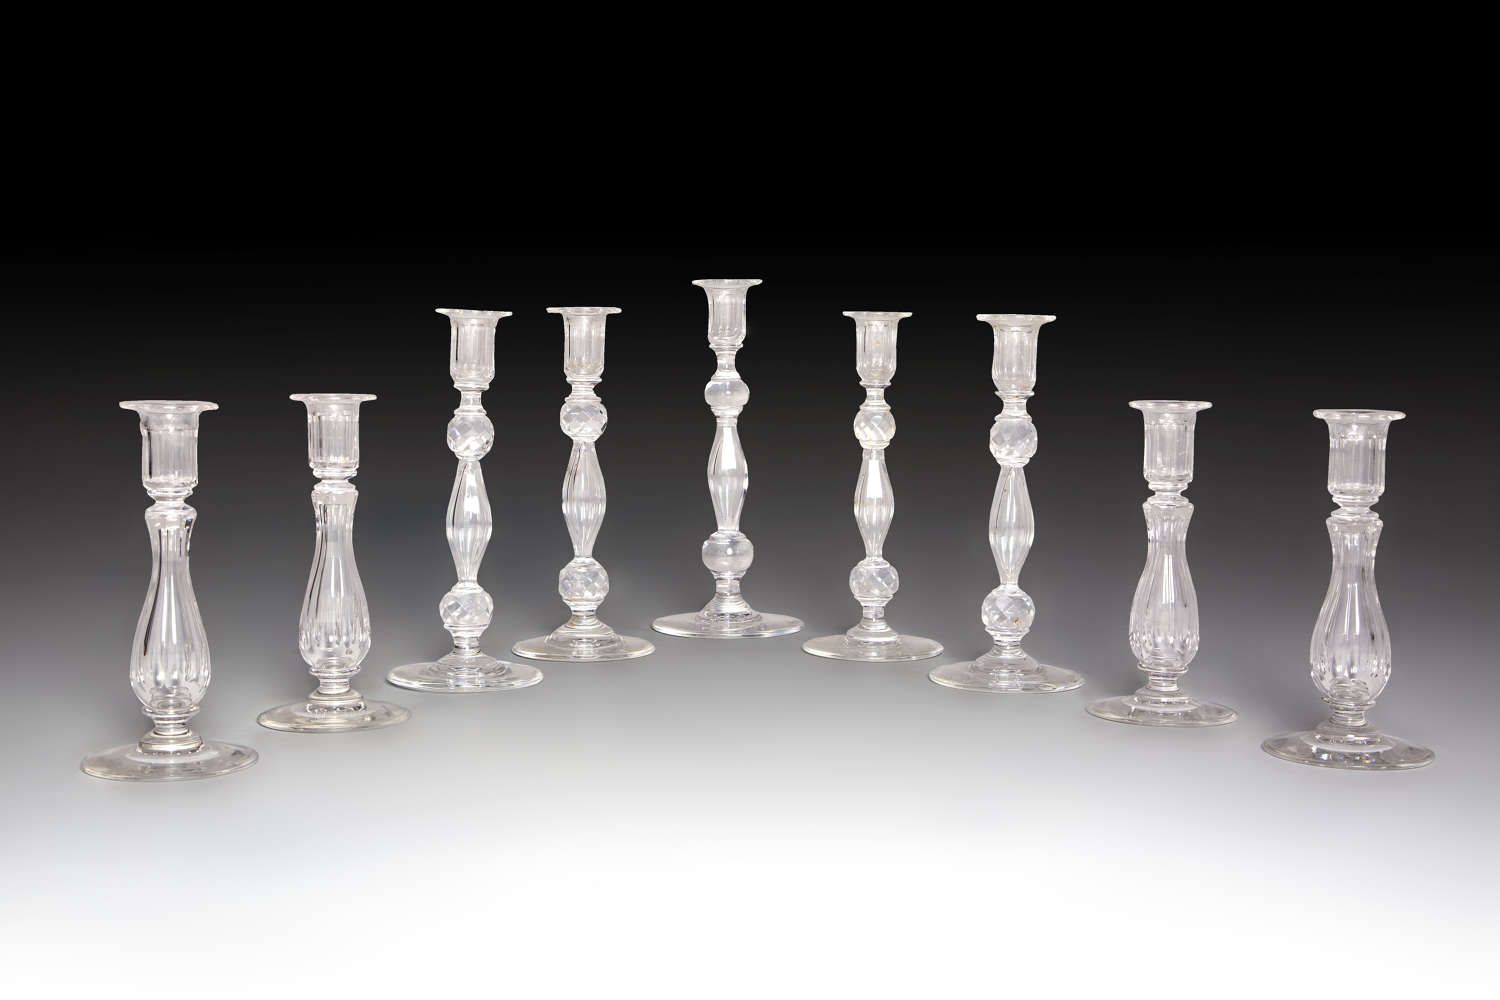 A collection of glass candlesticks